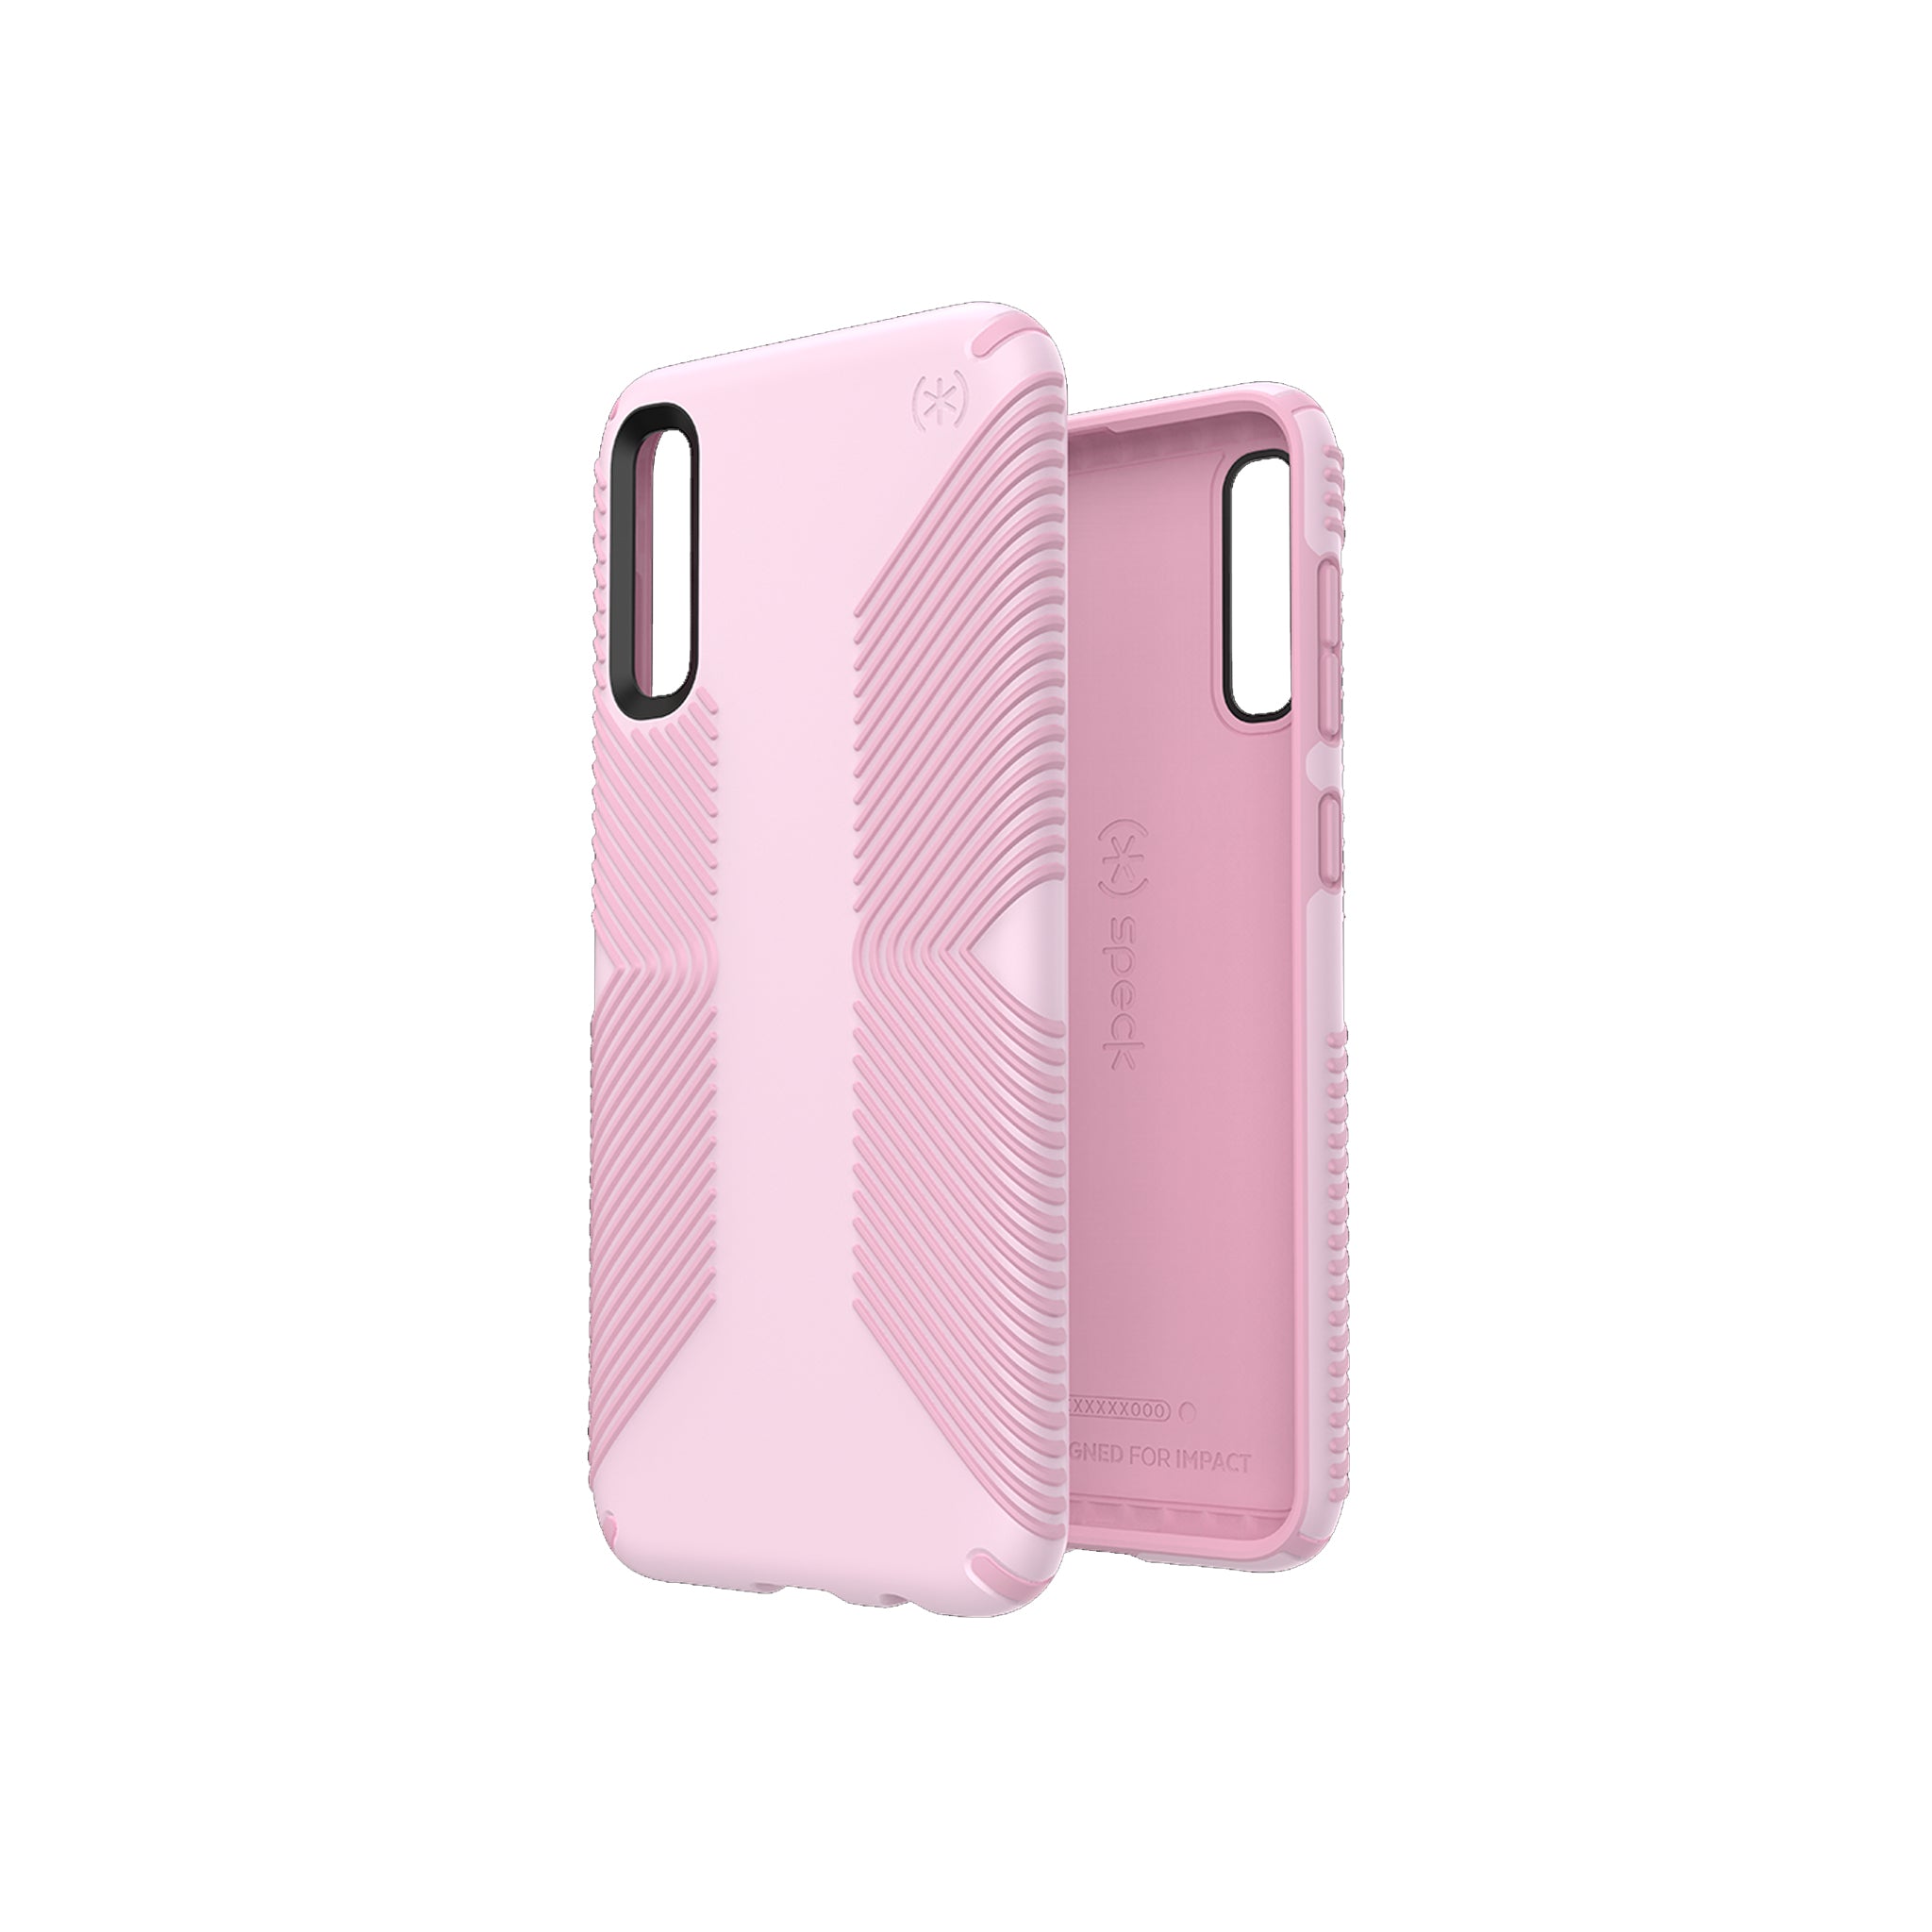 Speck - Presidio Grip Case For Samsung Galaxy A50 - Ballet Pink And Ribbon Pink